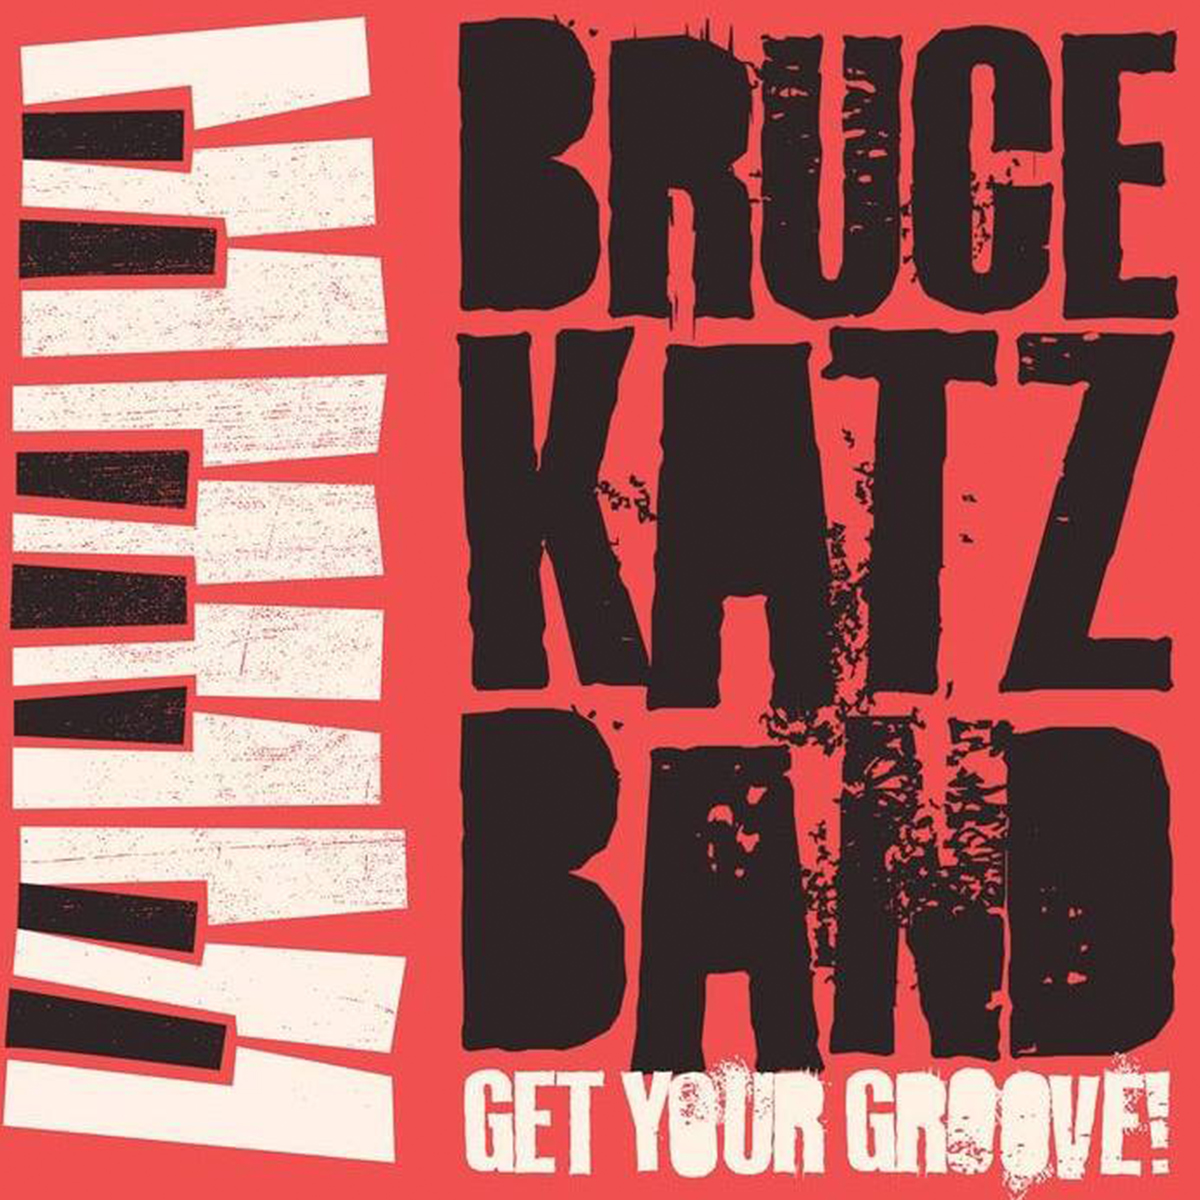 bruce katz band album cover with name